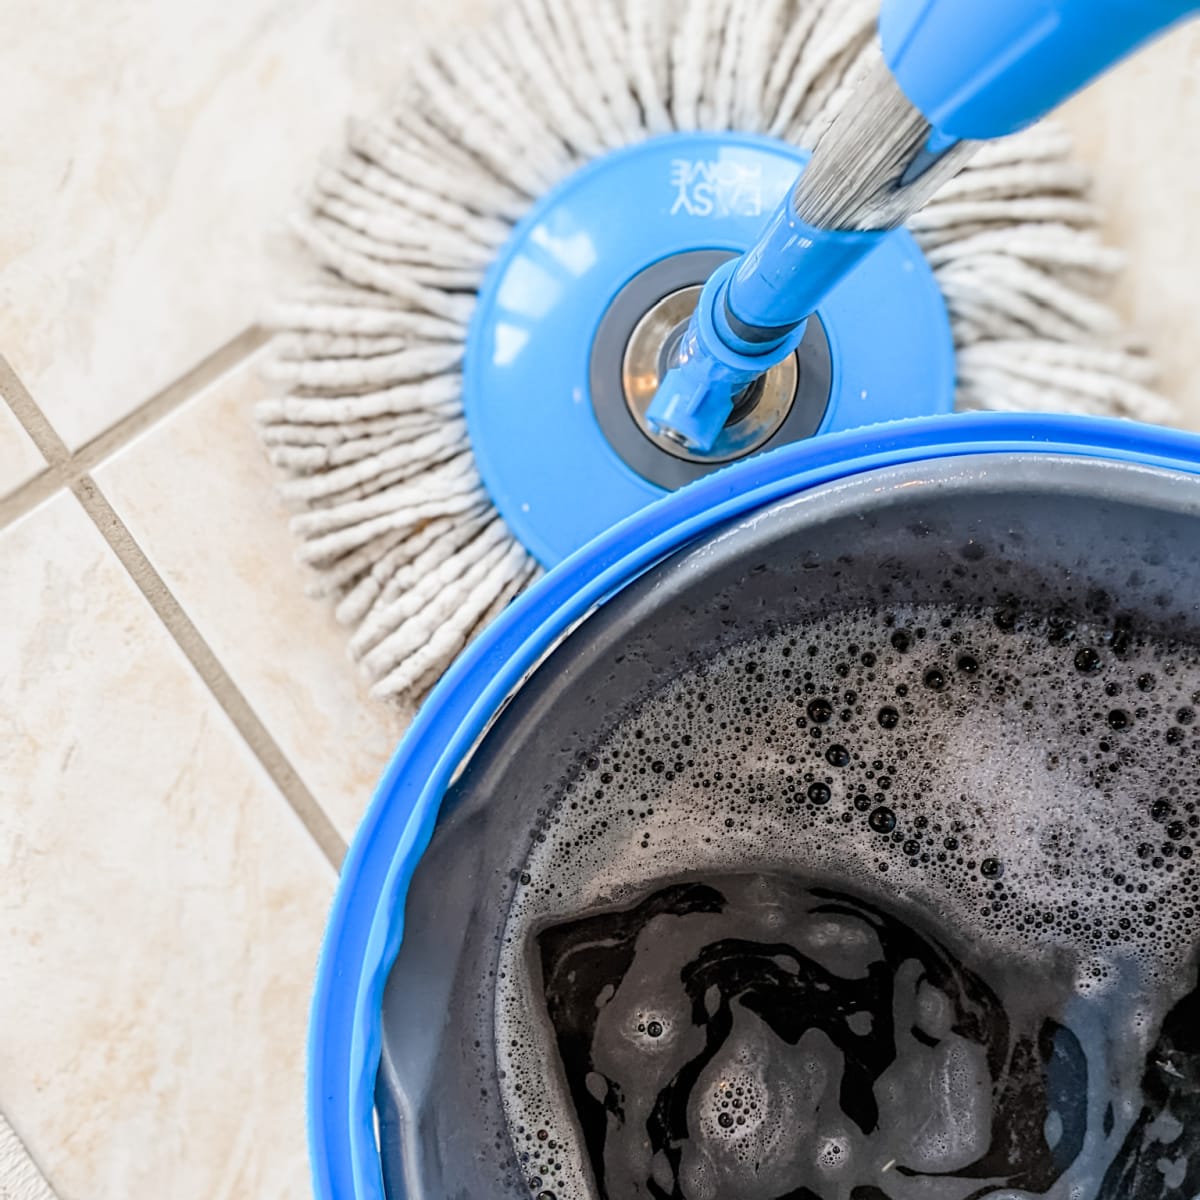 10 Simple Homemade Floor Cleaner Recipes